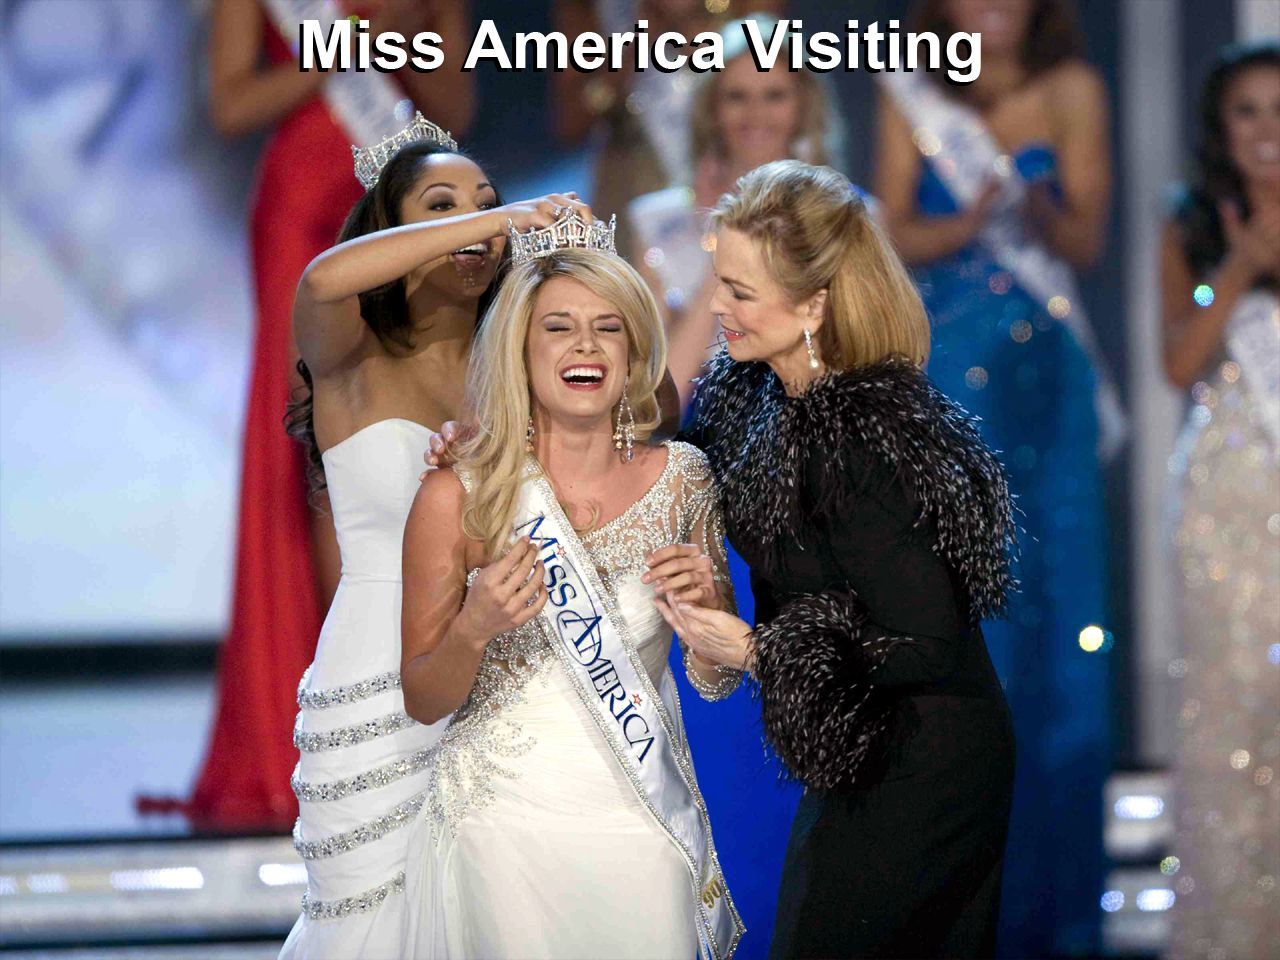 a woman in a miss america sash is being crowned